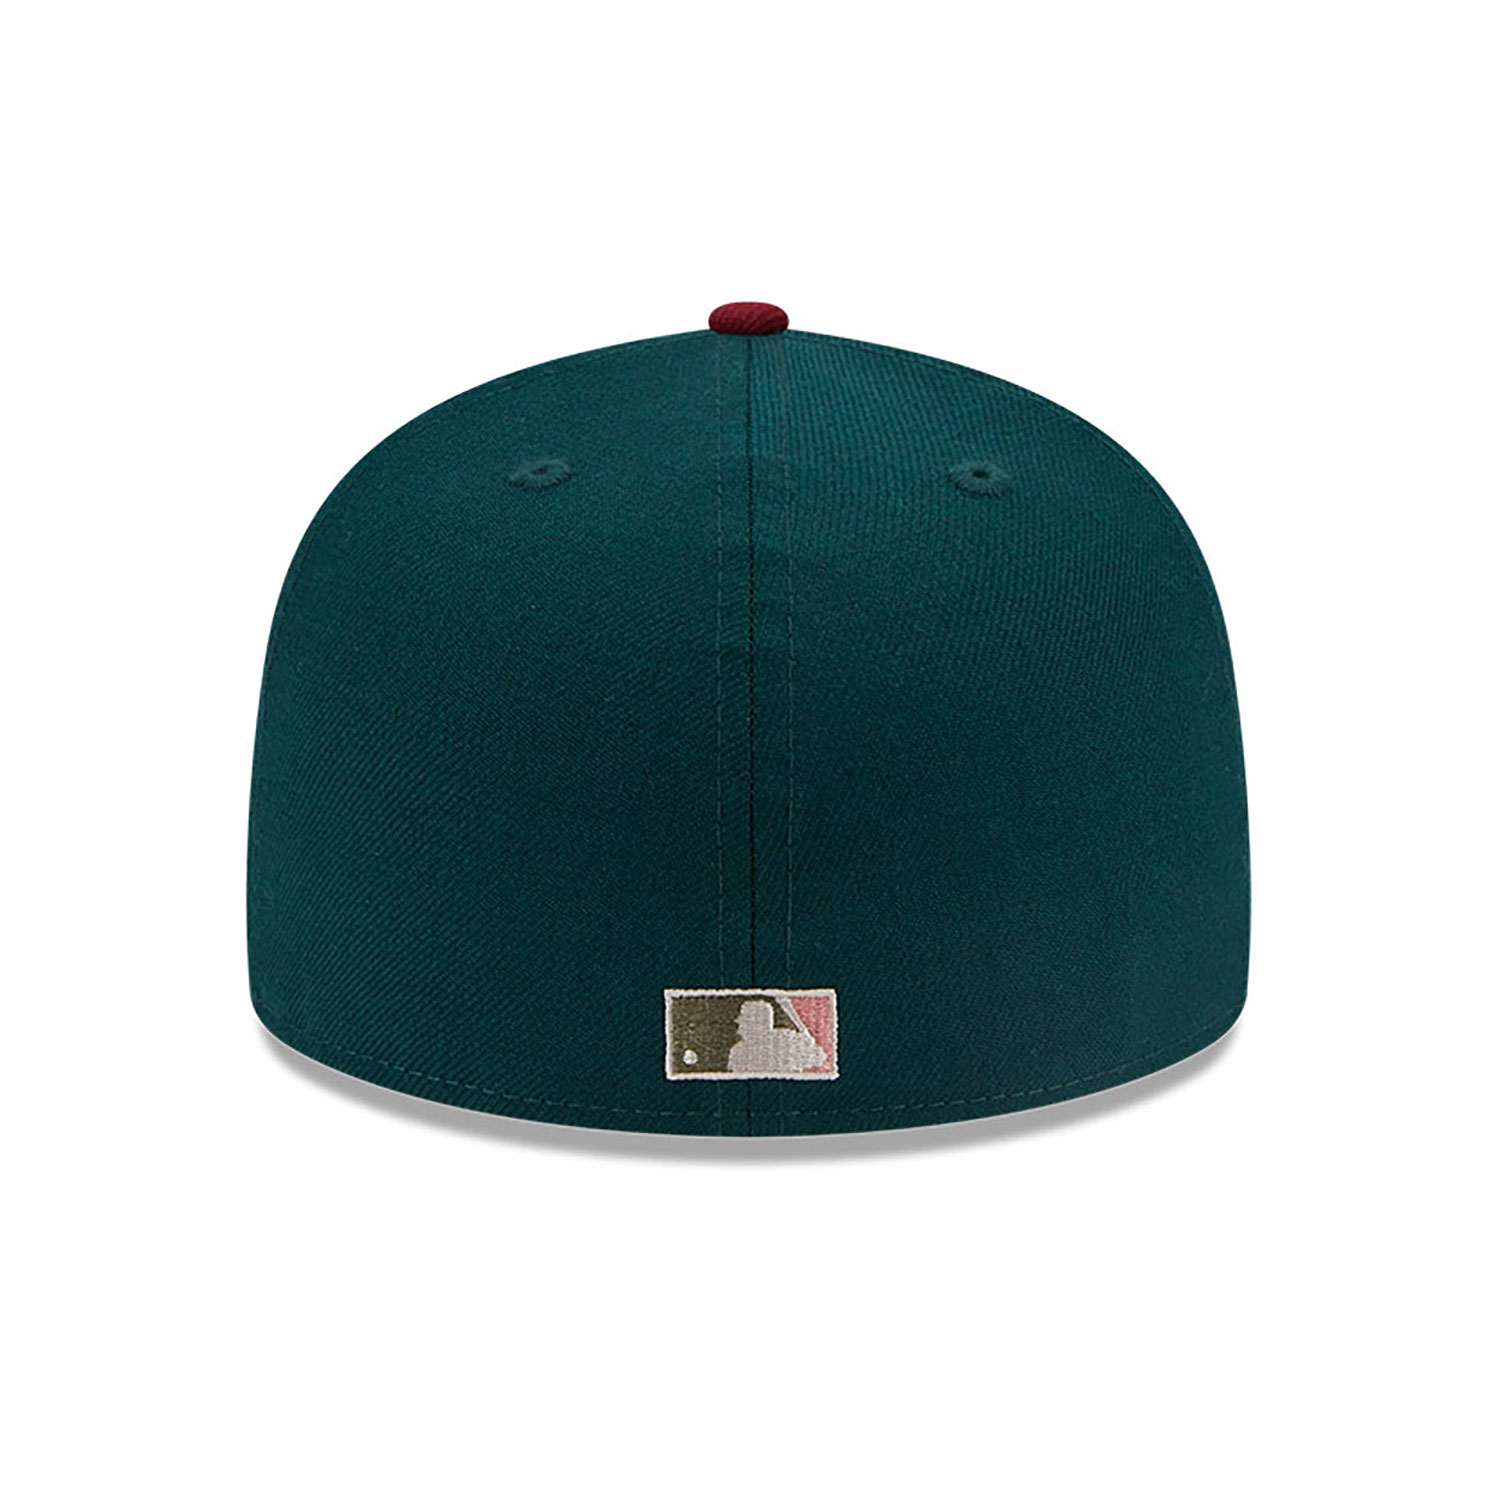 Atlanta Braves World Series Collard Greens 59Fifty Fitted